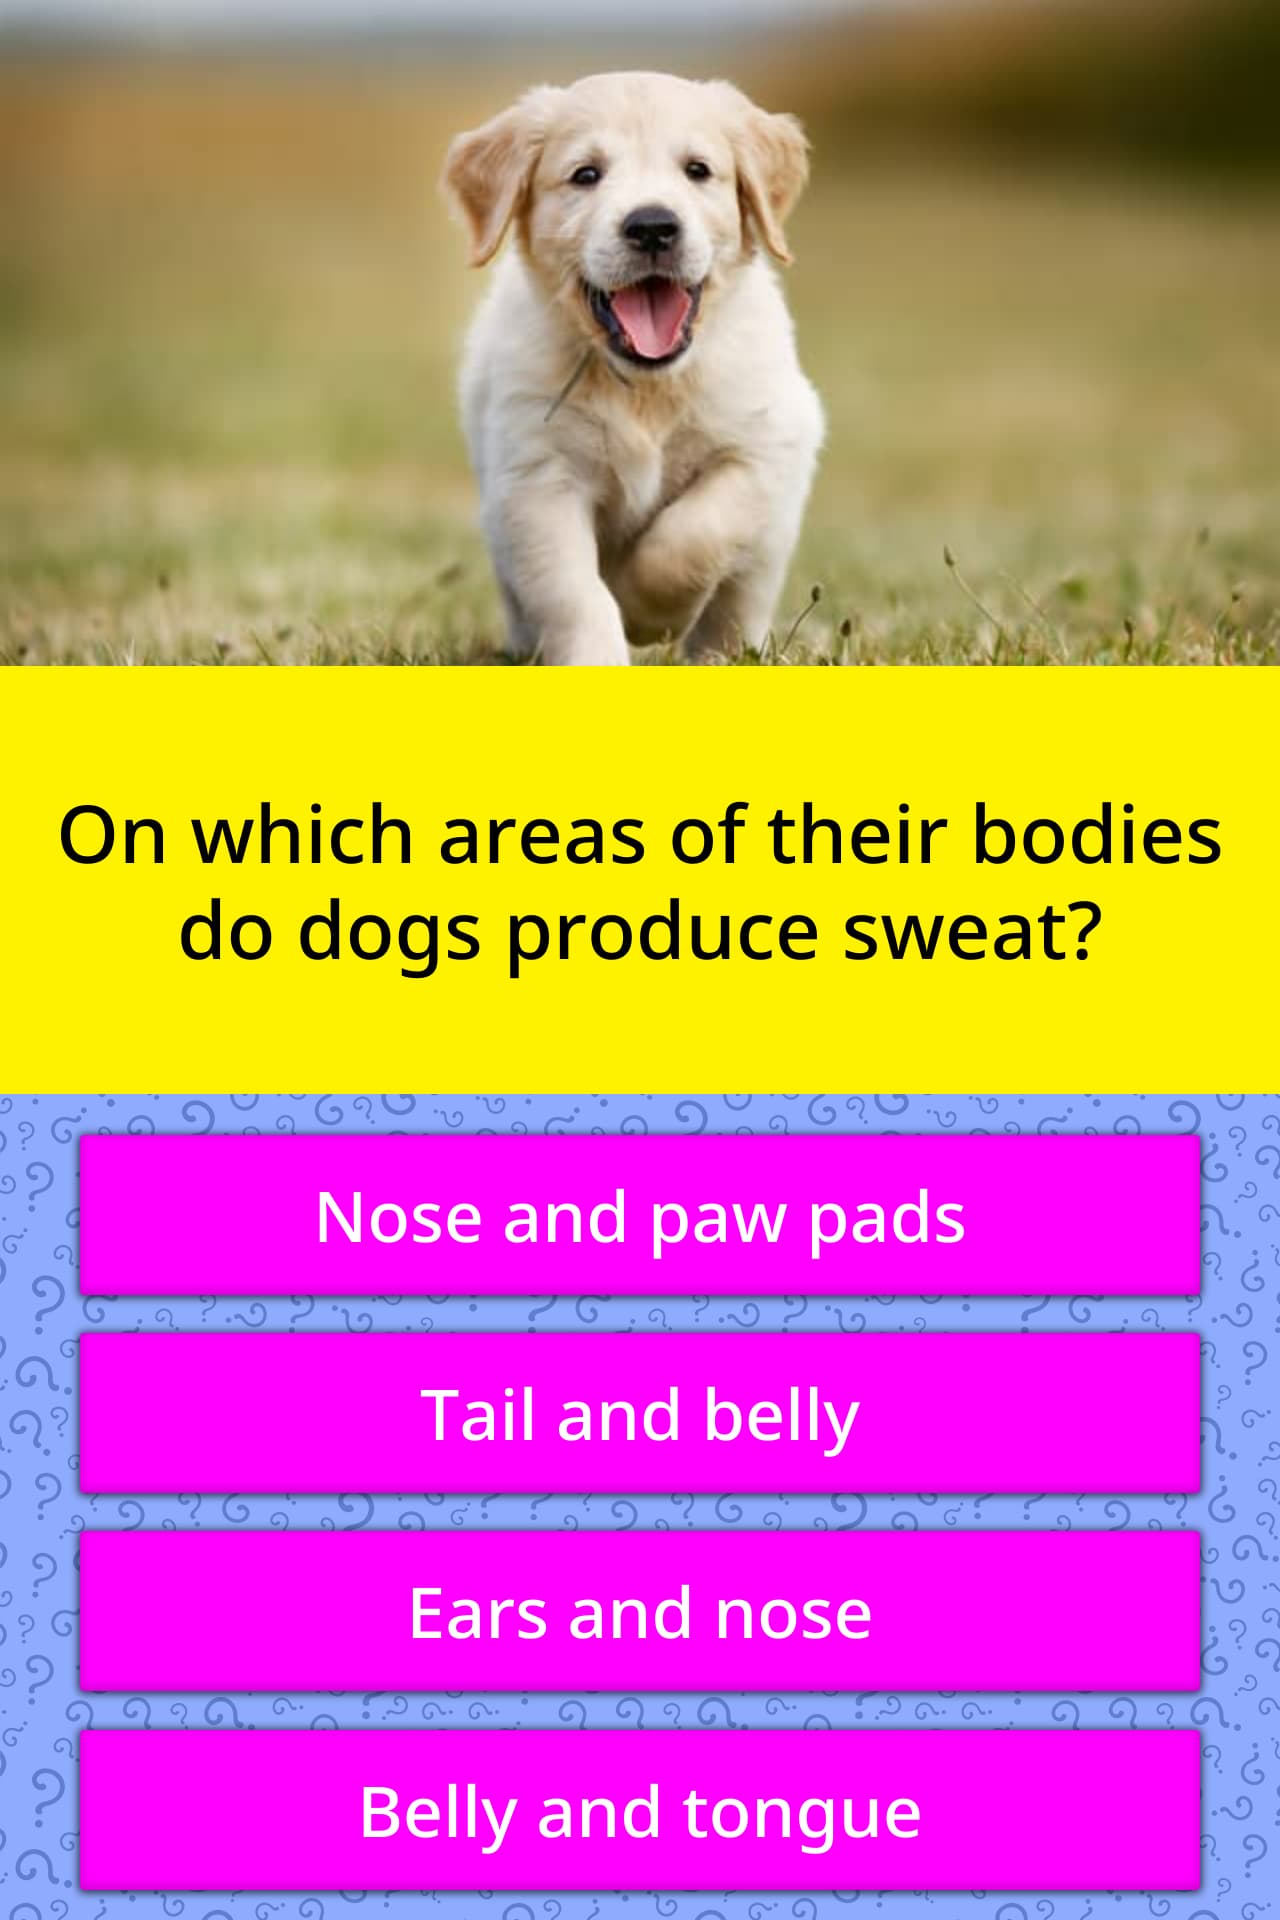 What are the only places that dogs have sweat glands * 1 point?